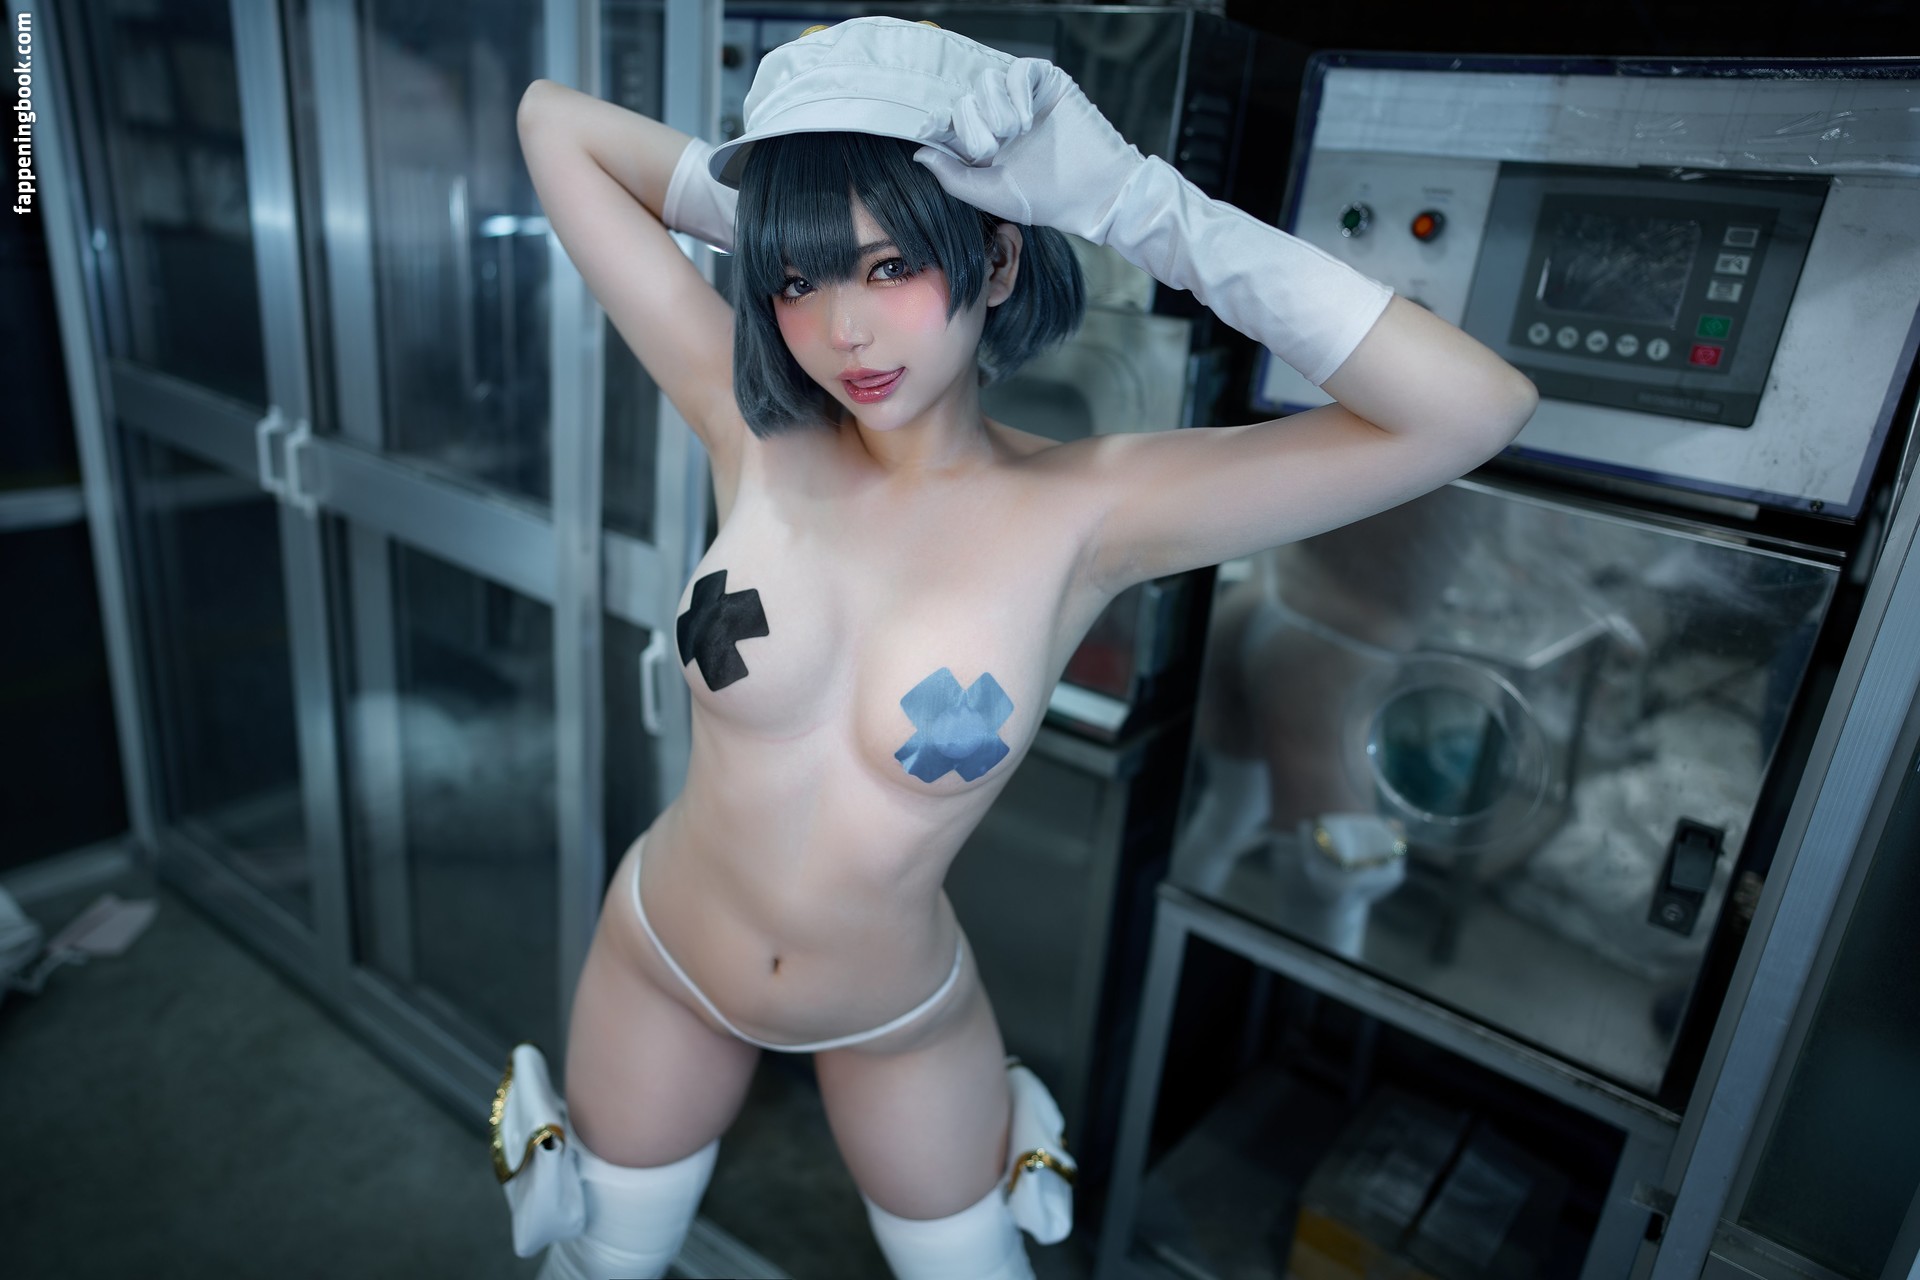 1000 faces cosplay nude